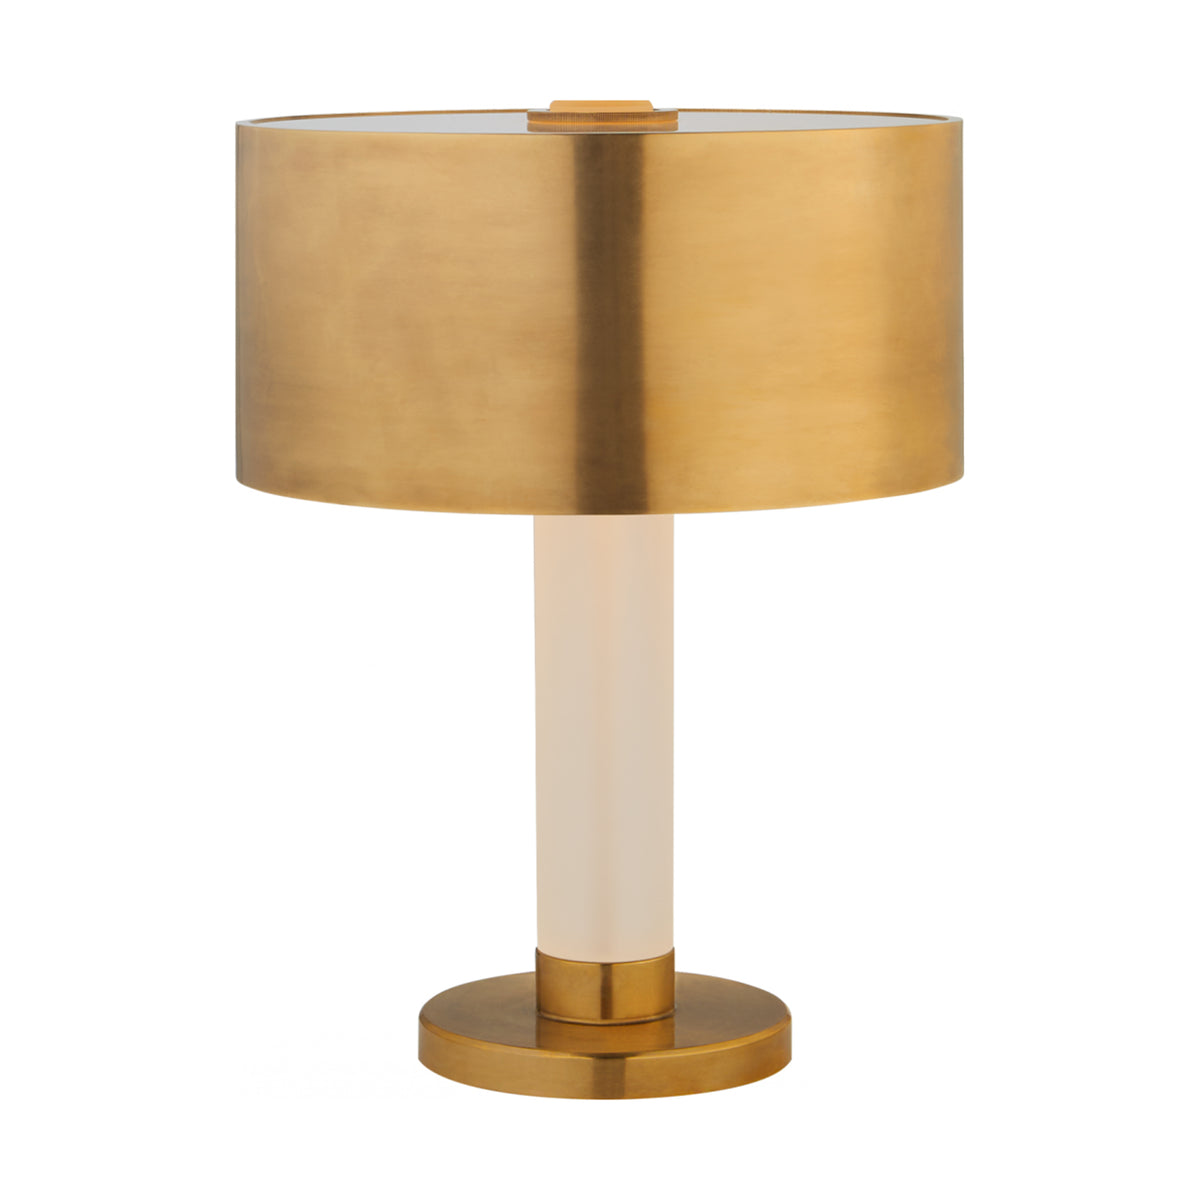 BARTON DESK LAMP IN NATURAL BRASS AND ETCHED CRYSTAL WITH NATURAL BRASS SHADE